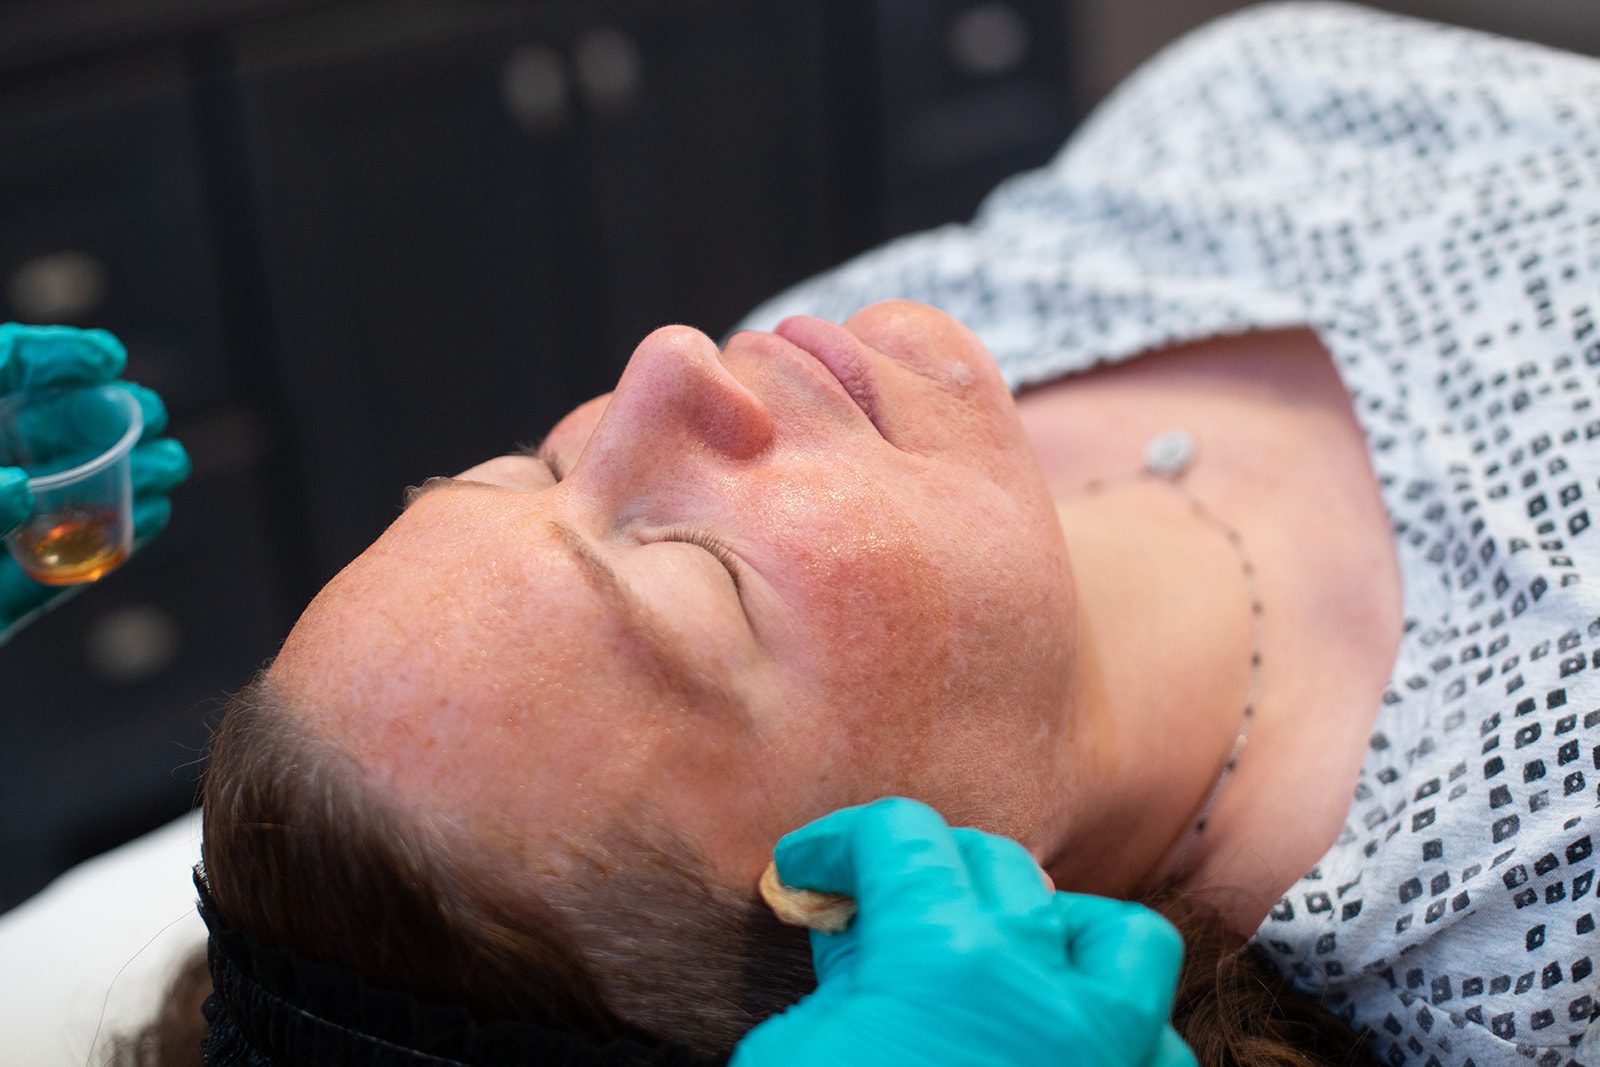 Rejuvenate the Skin You're In With a Chemical Peel - Dontage